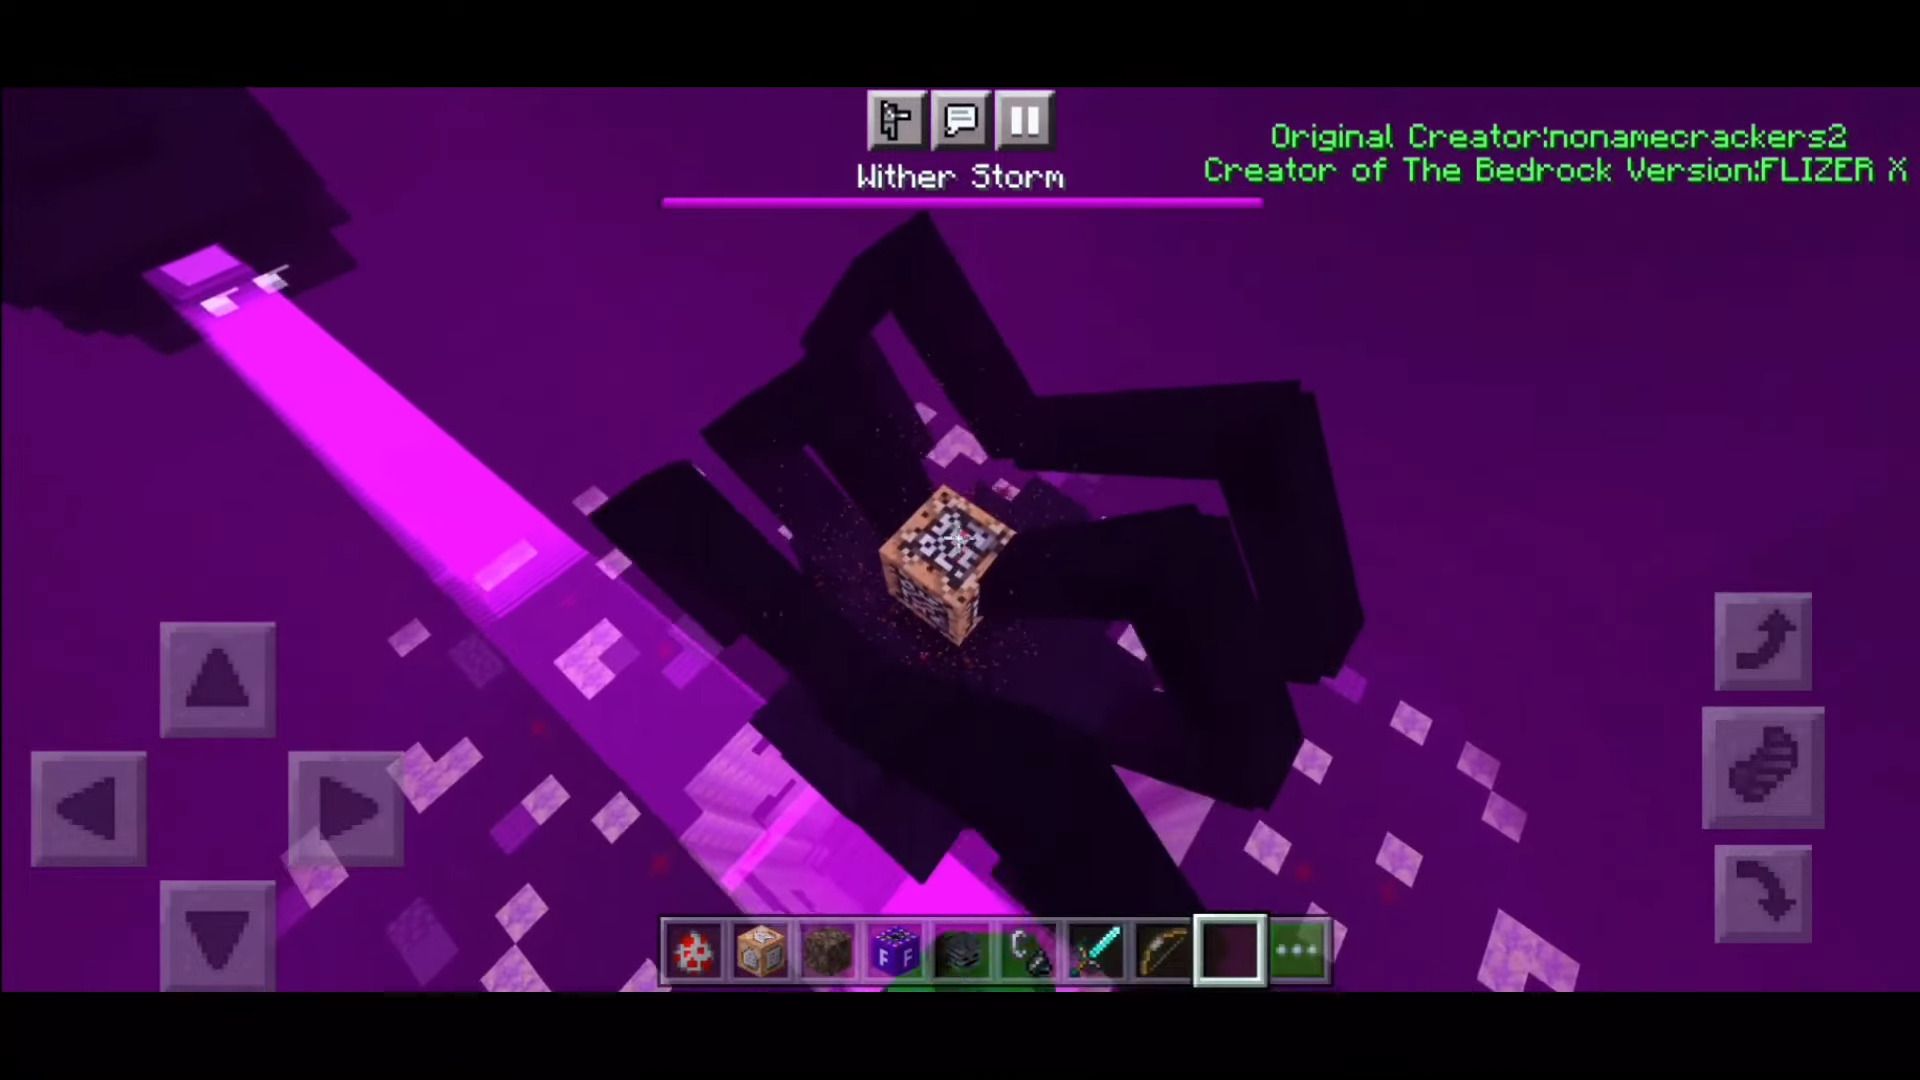 Crackers Wither Storm Mod MCPE - Apps on Google Play